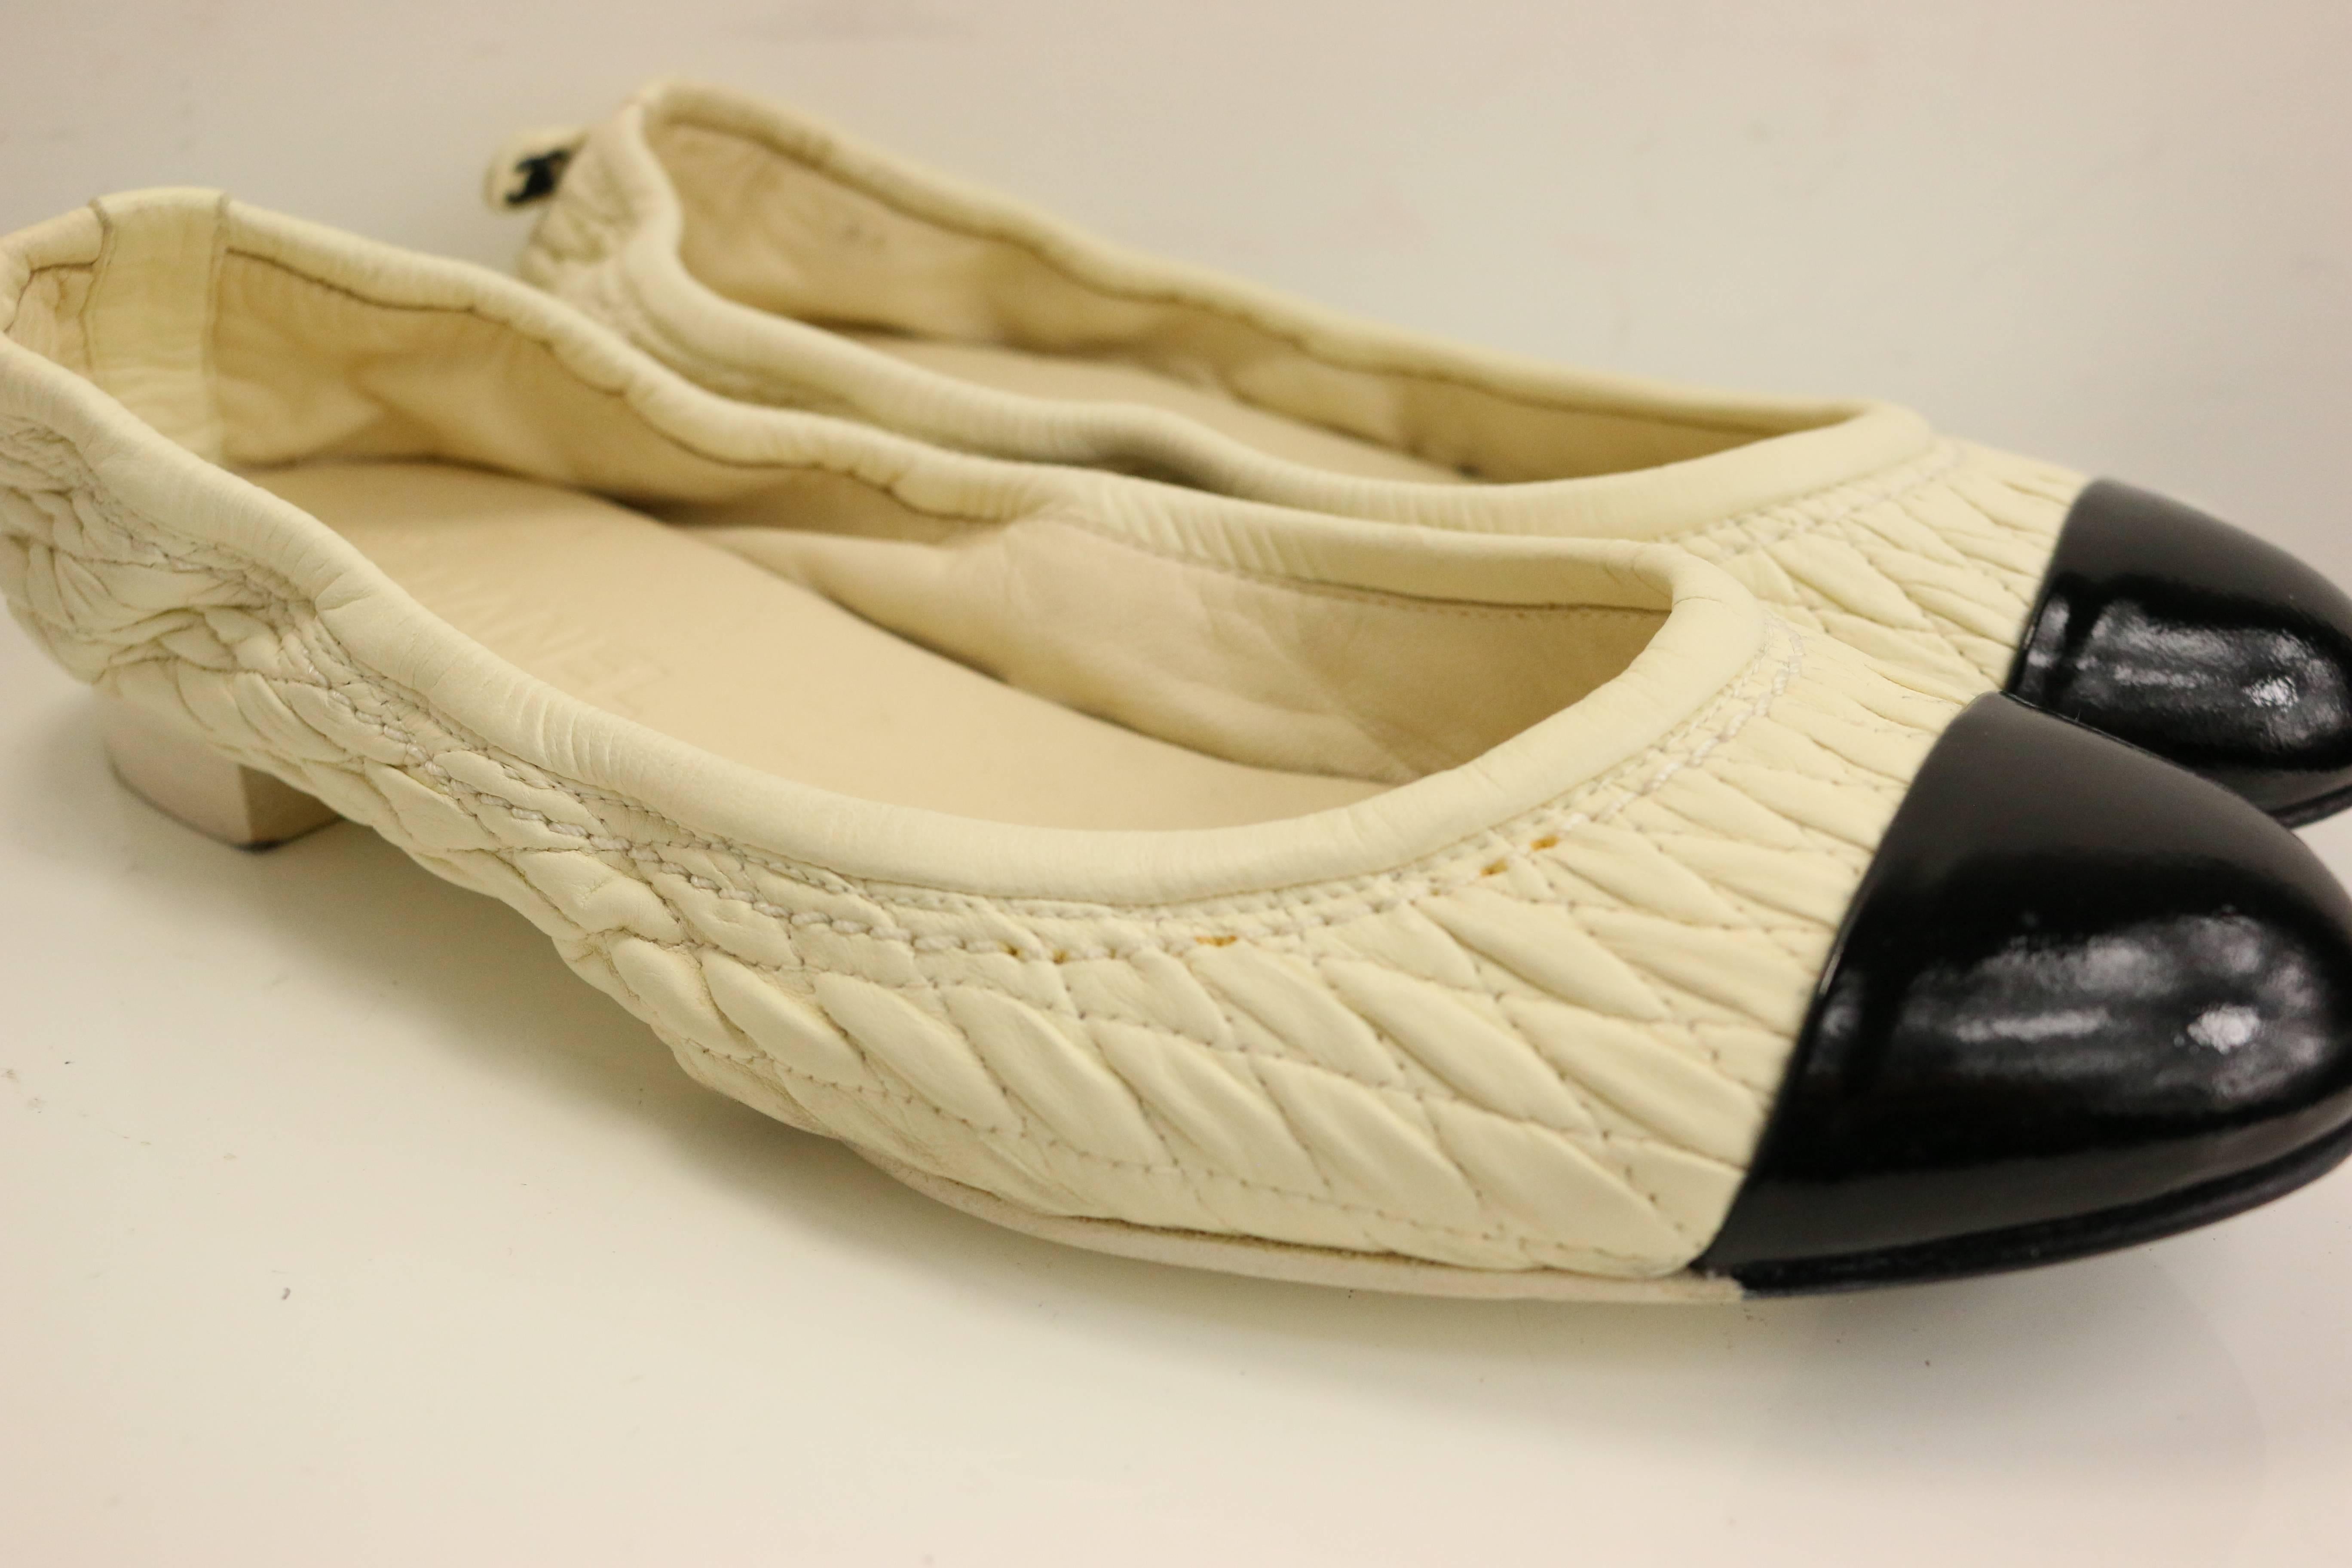 - Vintage 90s Chanel bi tones quilted white leather / black patent leather cap toe stretch ballerina ballet flats shoes. 

- Made in Italy. 

- Featuring black 